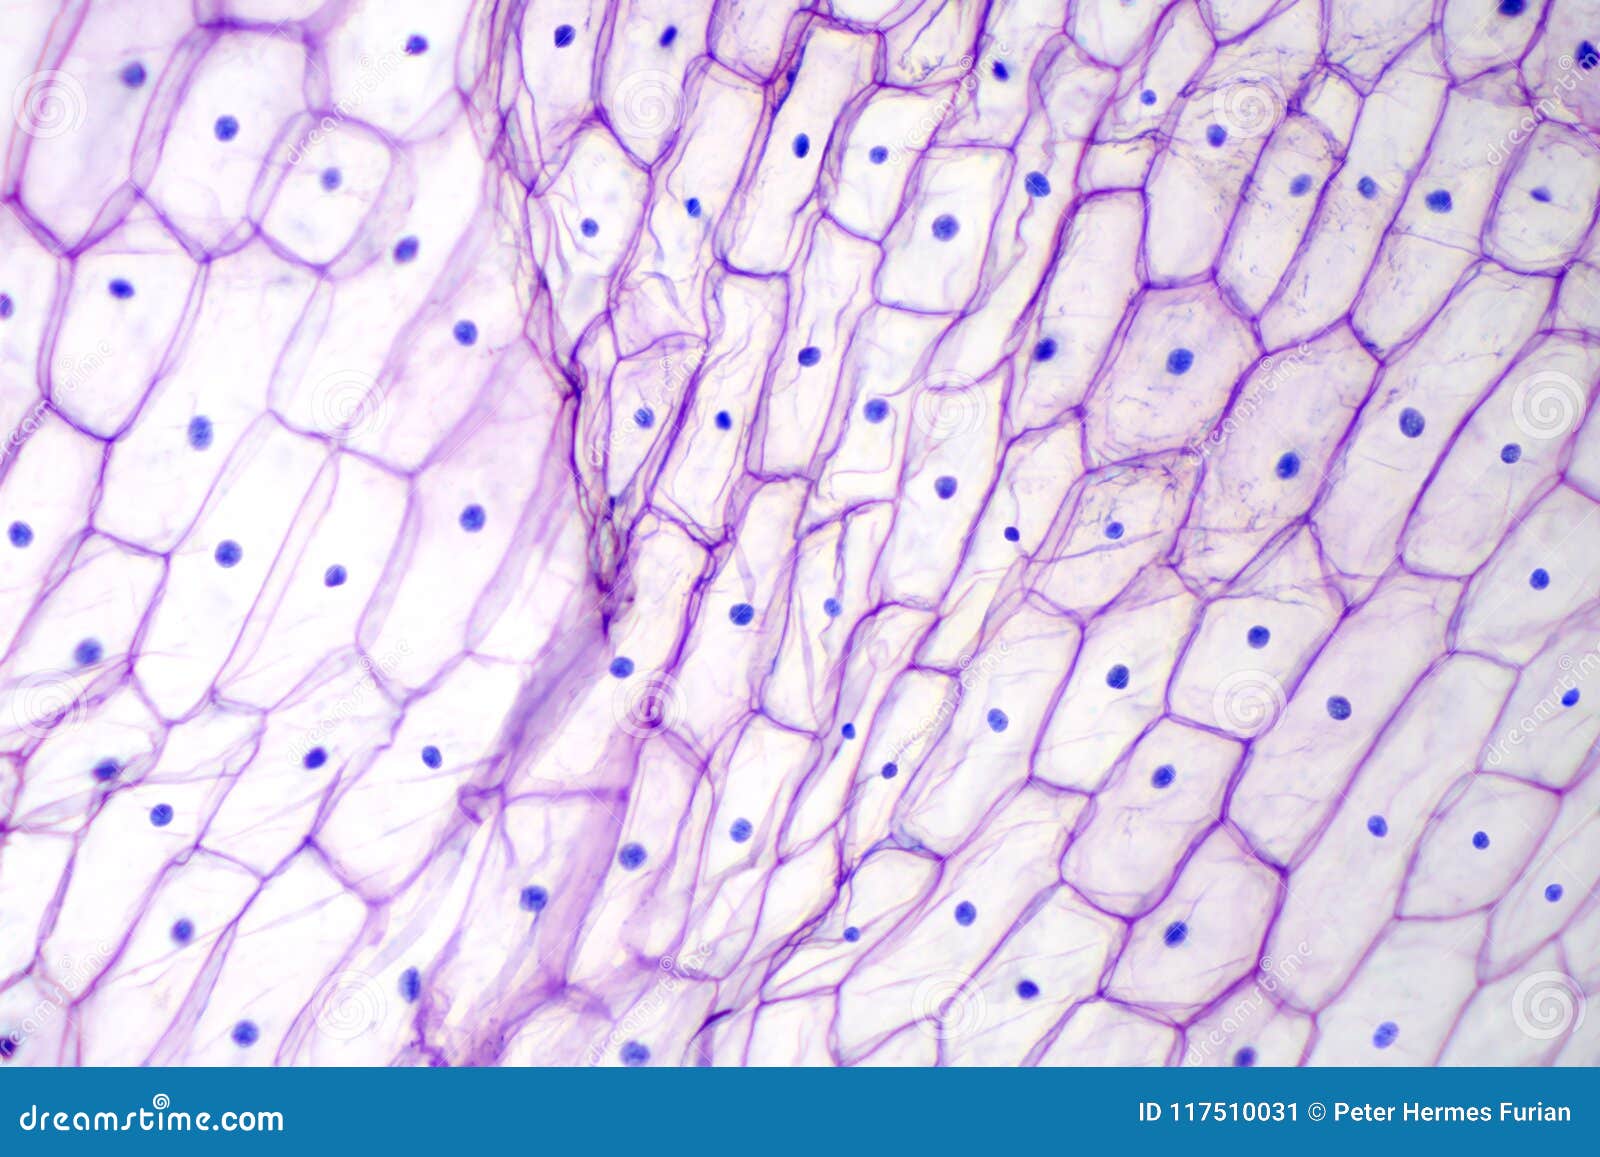 onion epidermis with large cells under microscope